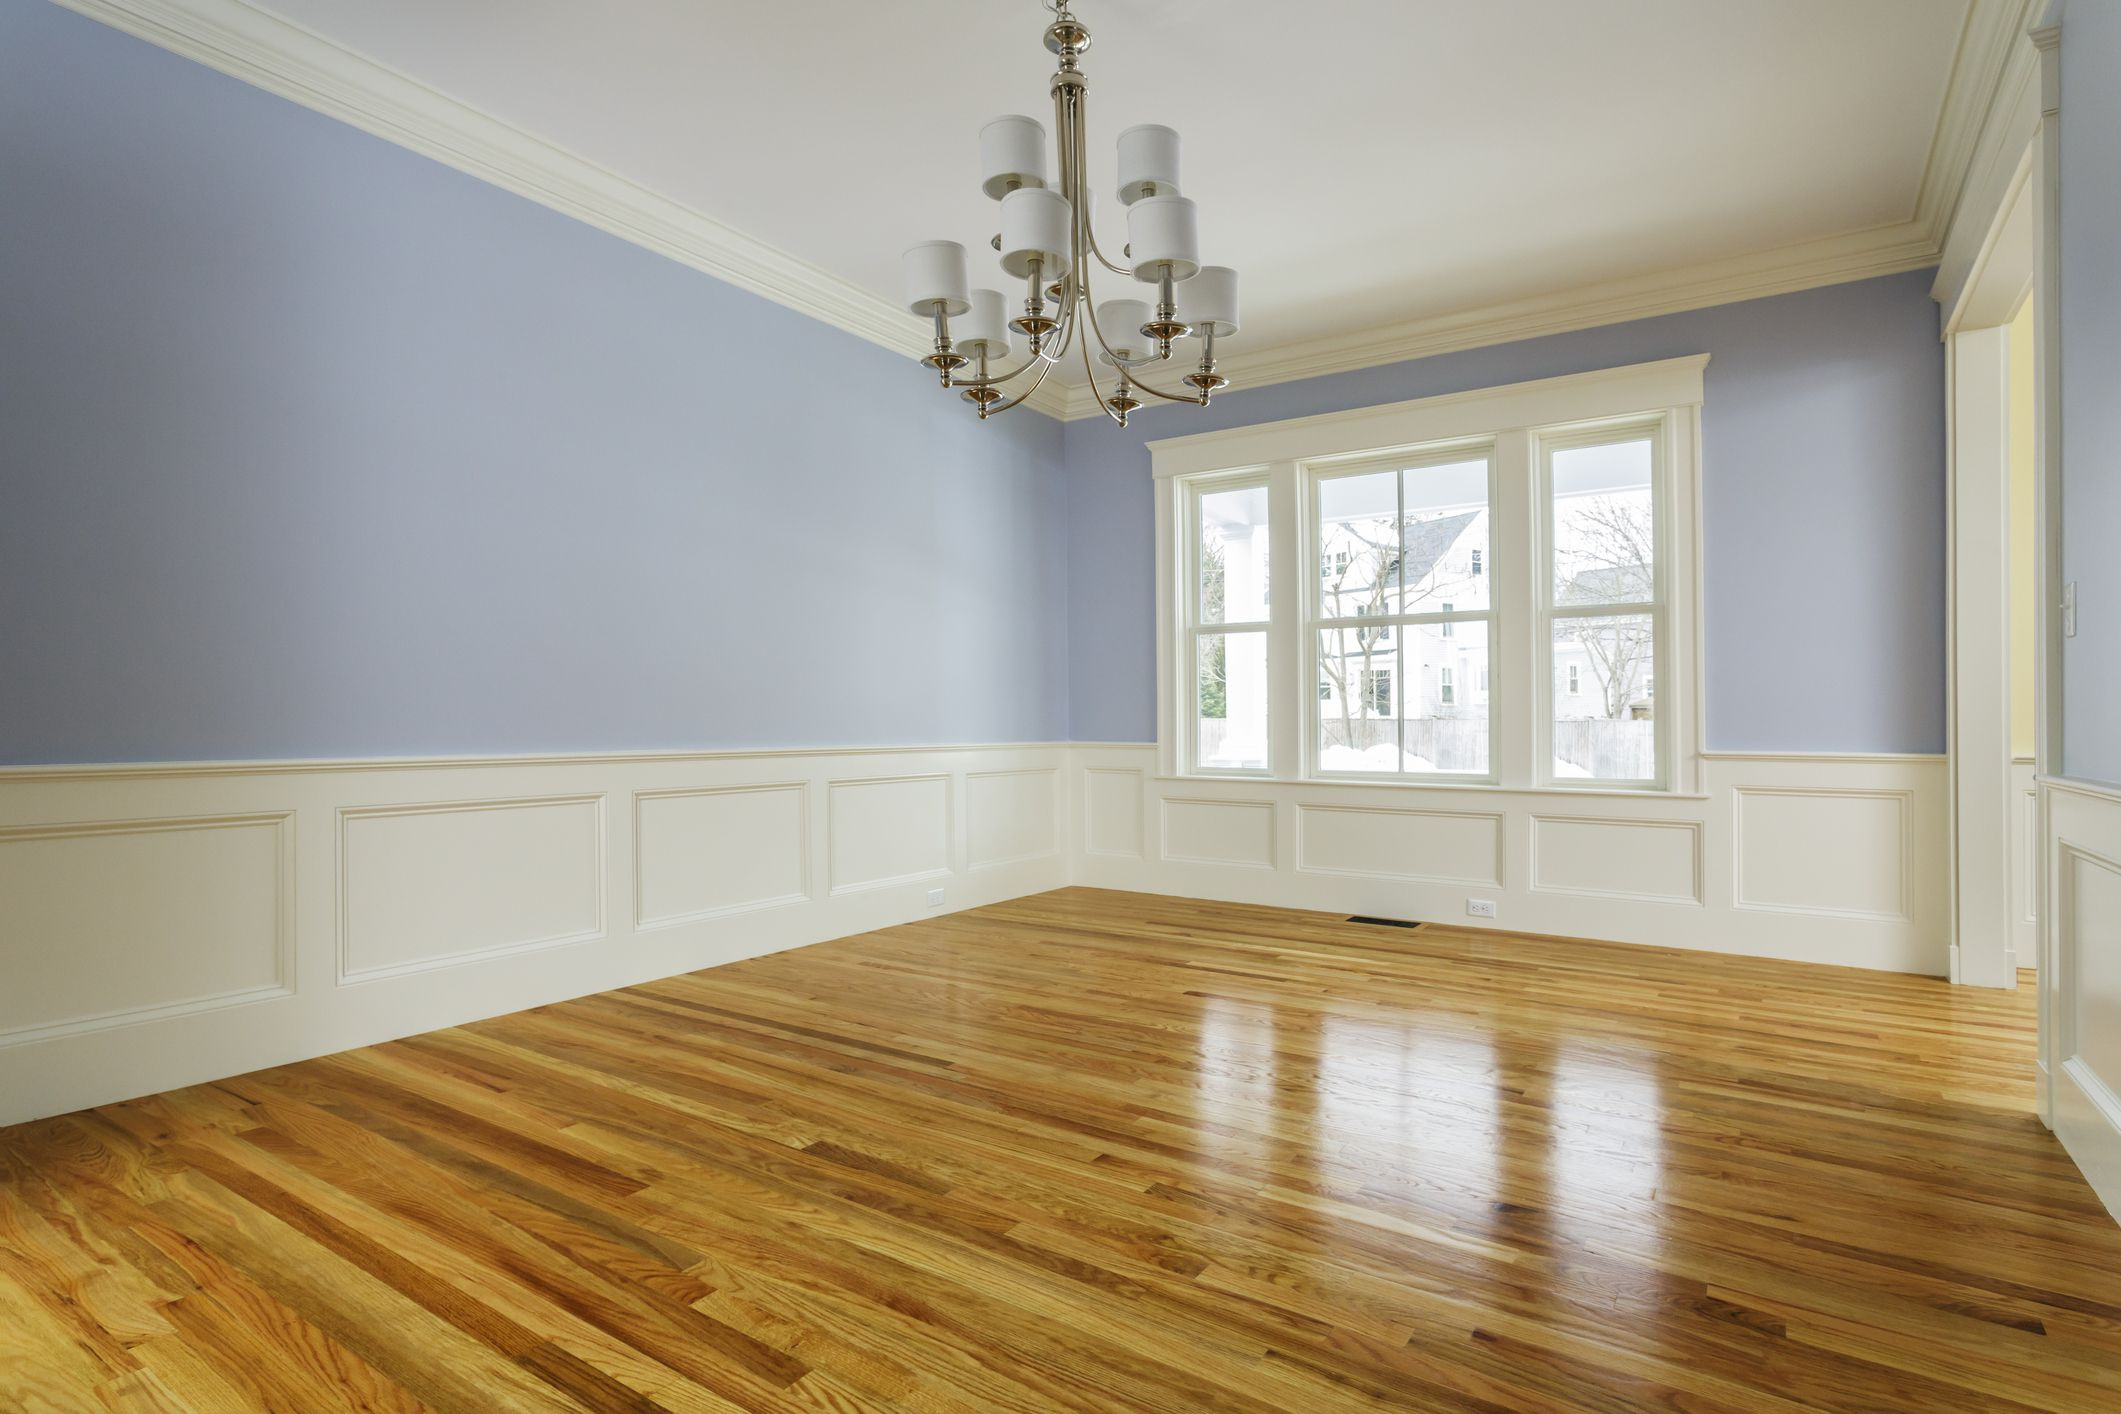 27 attractive Hardwood Floor Paint Colors 2024 free download hardwood floor paint colors of hardwood flooring finish stain decorative treatments with regard to hardwood 58f6bf9b5f9b581d59754f48